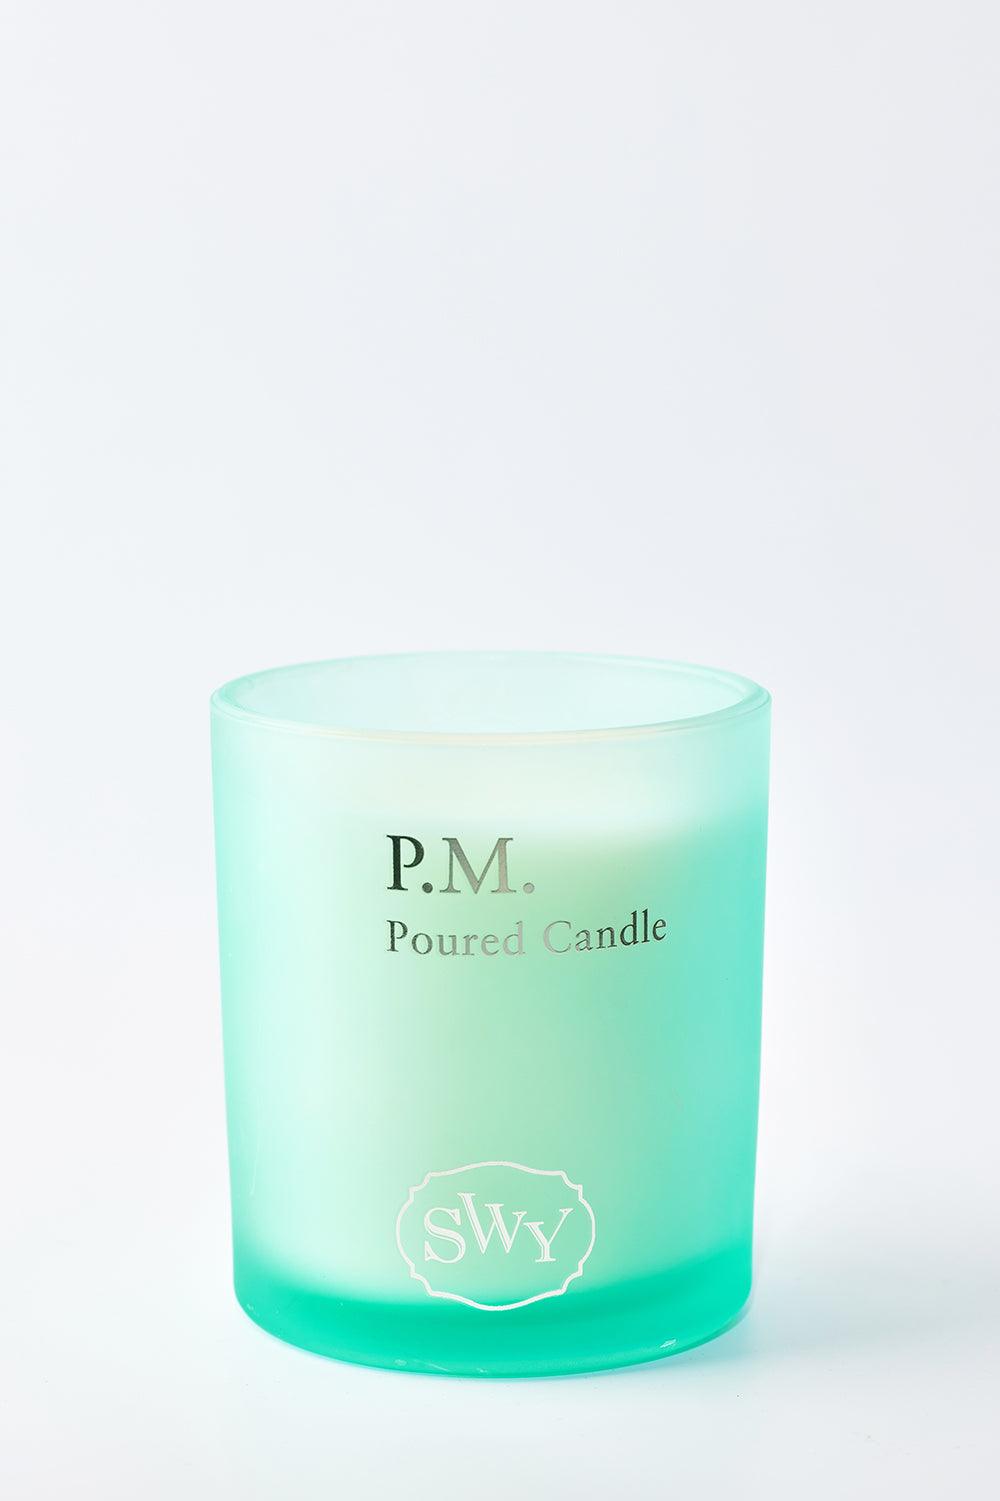 Poured Candle – P.M. - SWY - Scent With You